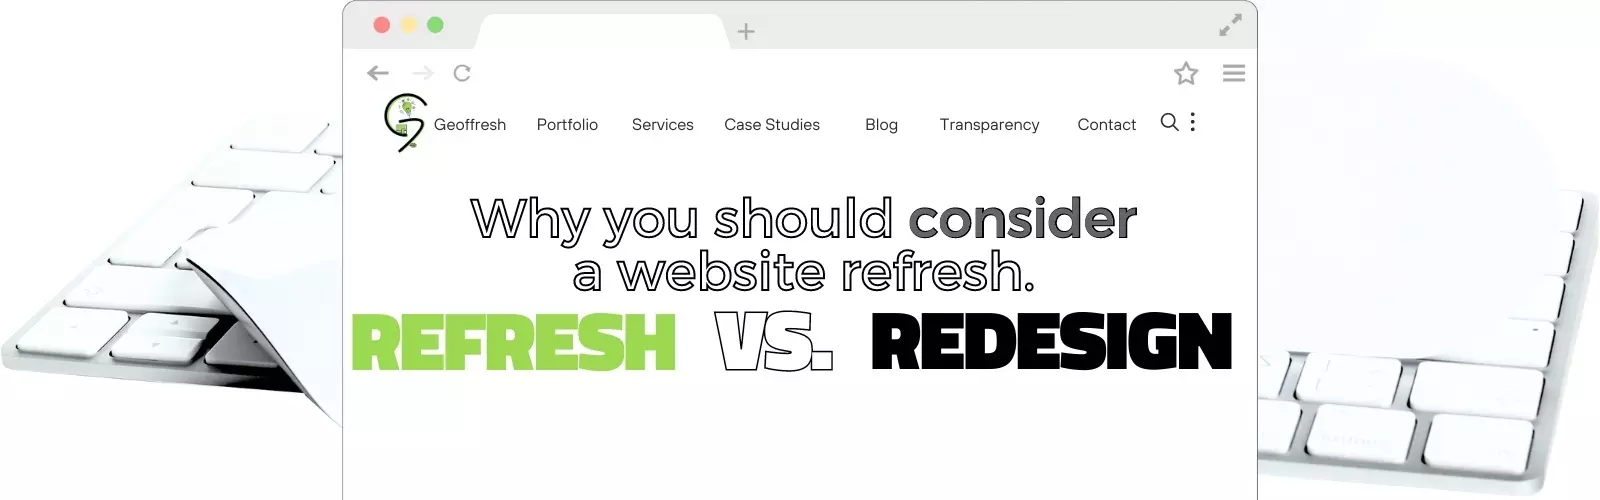 Key Differences Between a Refresh and a Redesign